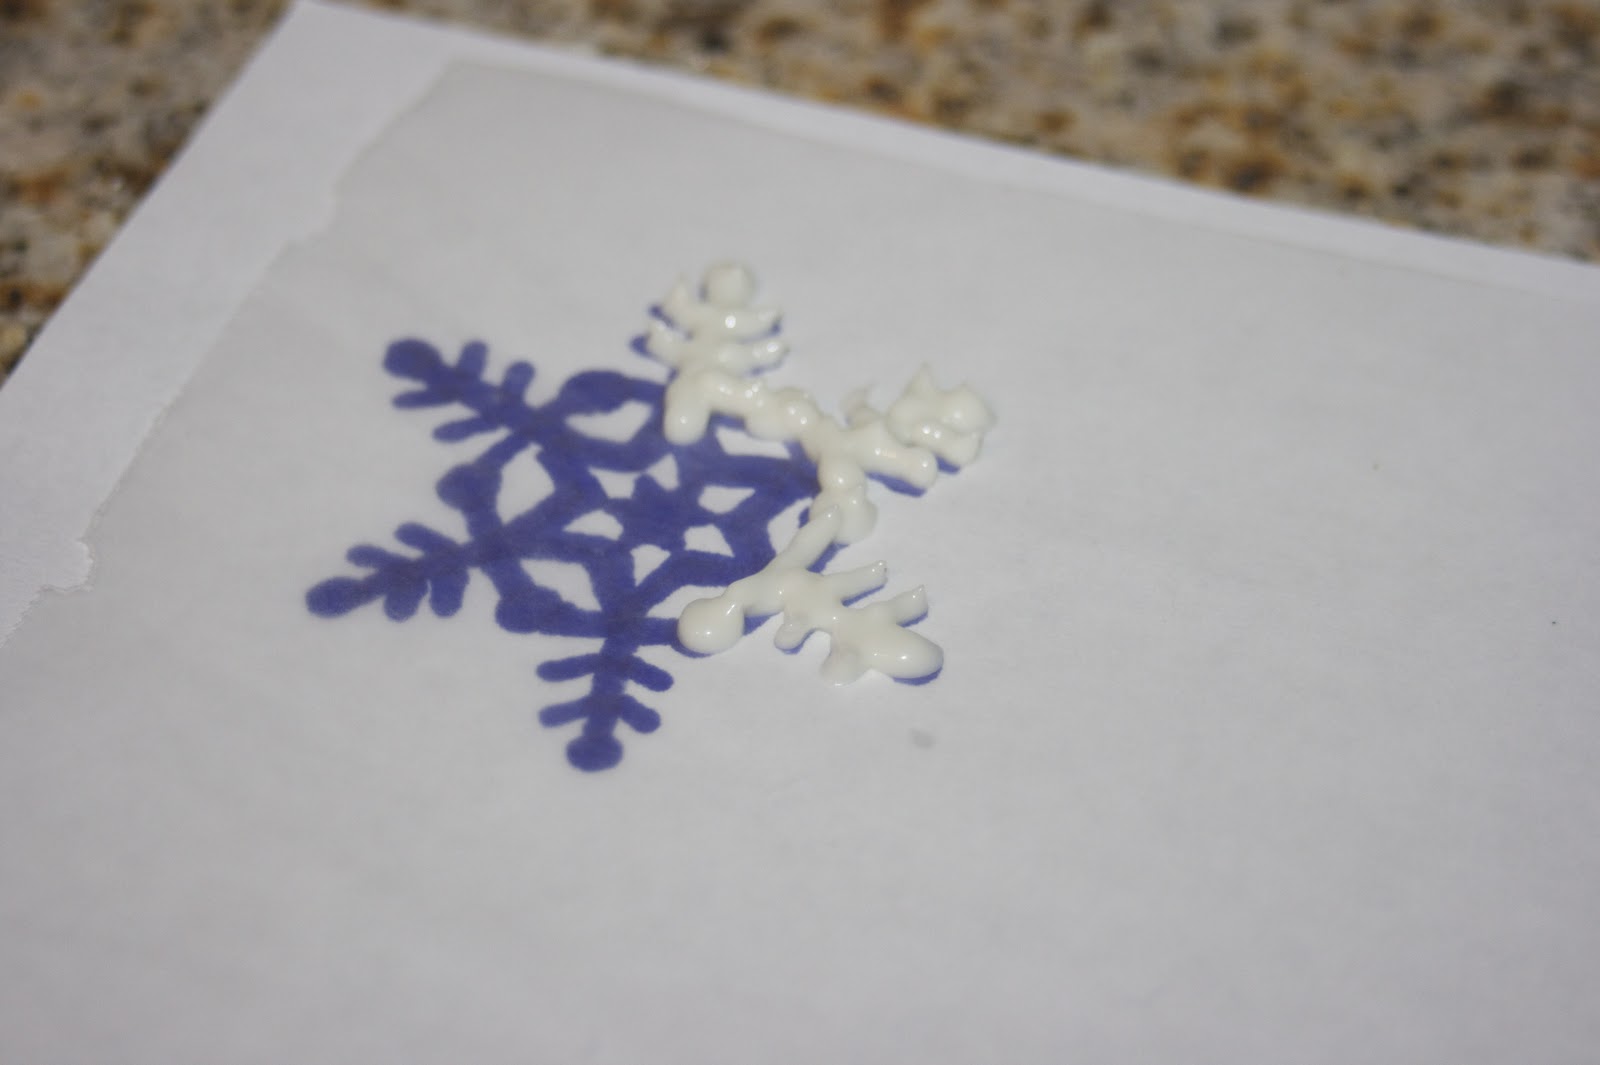 Sharing the Wealth: White Chocolate Snowflakes